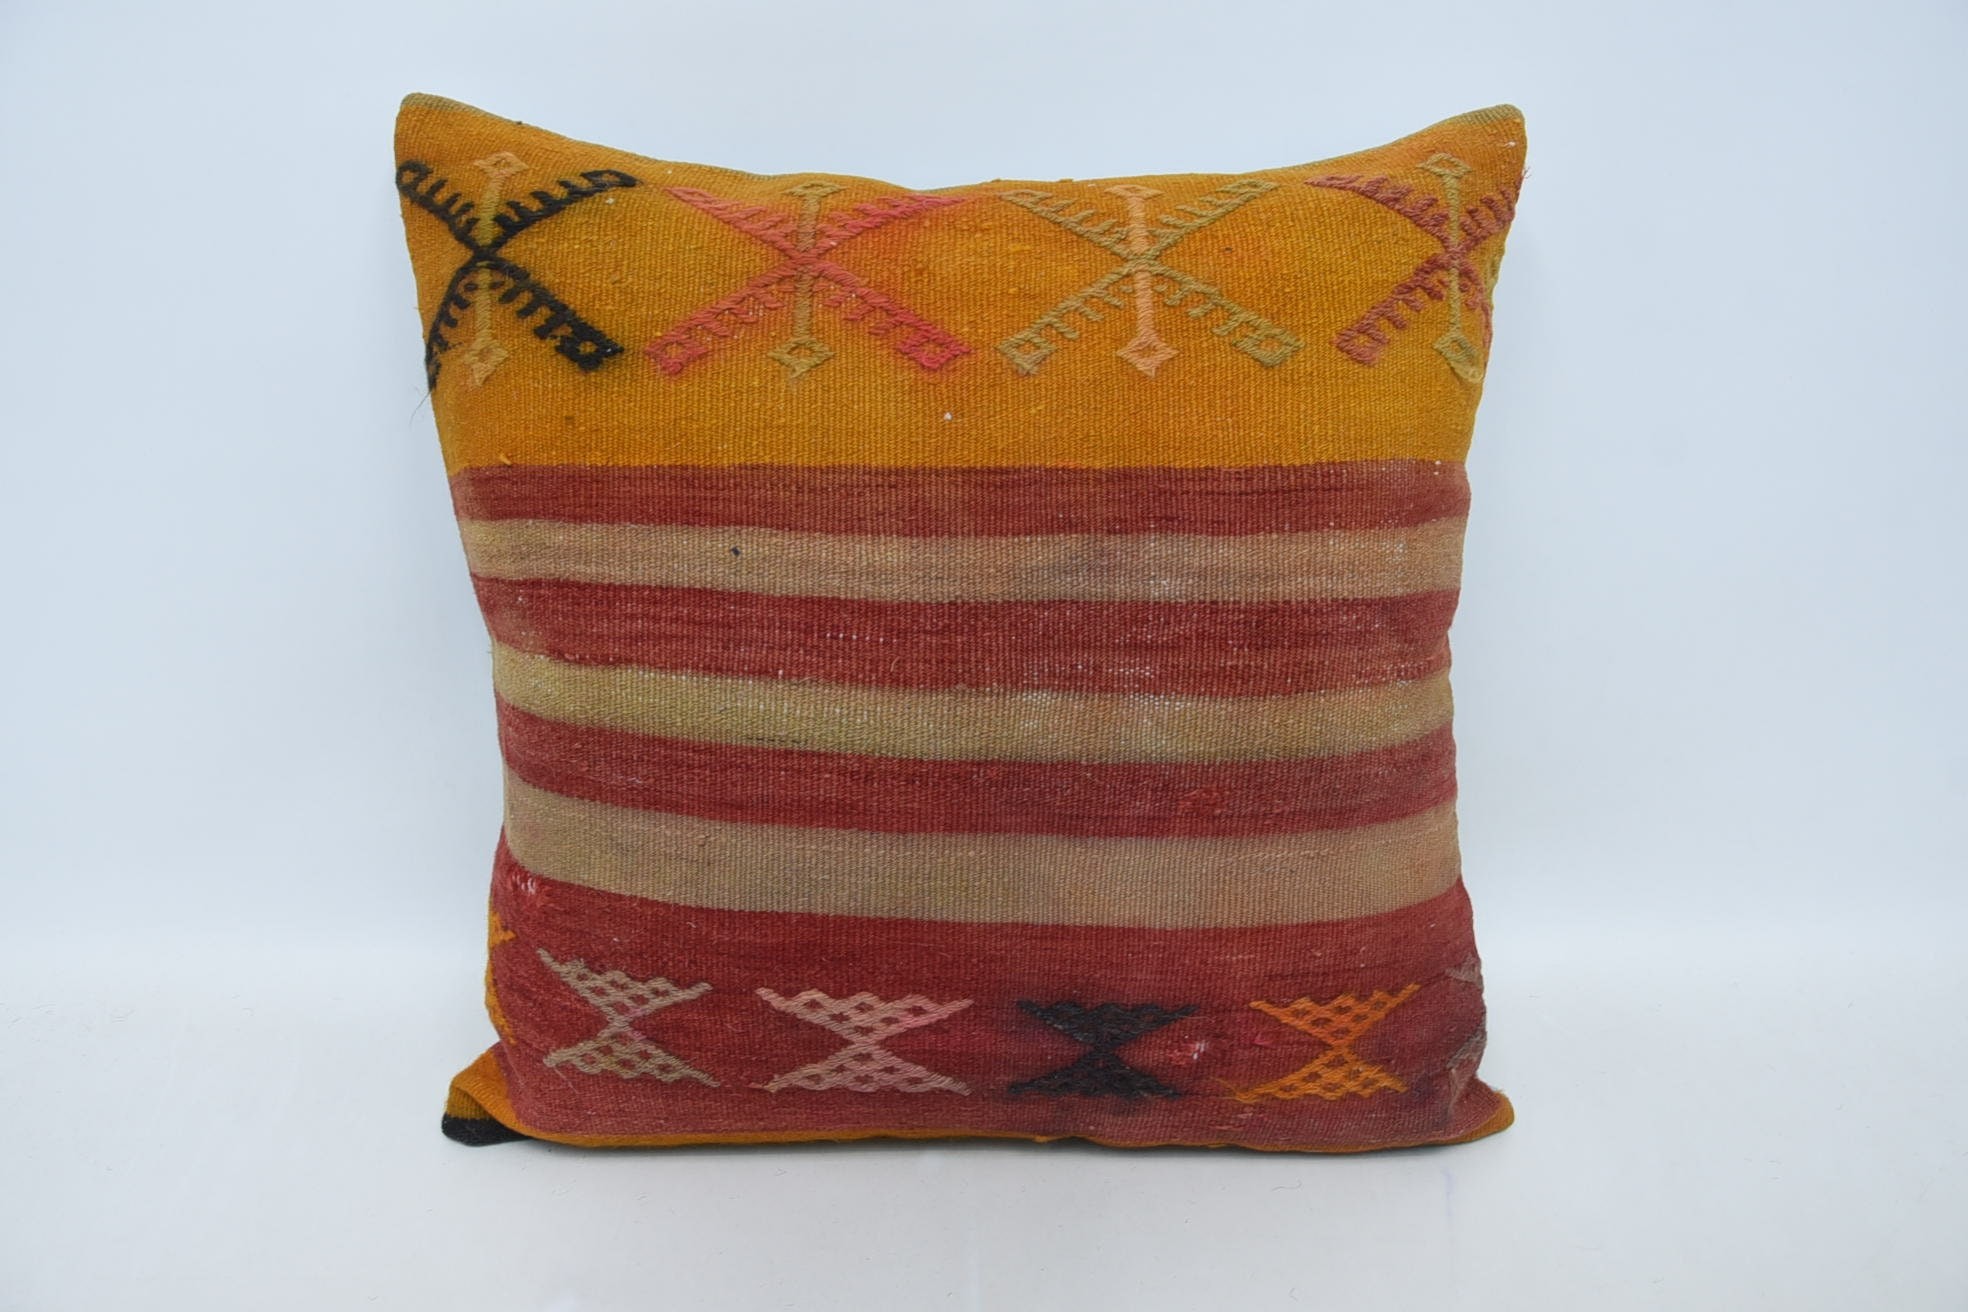 Couch Pillow Case, Interior Designer Pillow, Kilim Pillow Cover, Office Chair Cushion Case, 24"x24" Red Cushion, Vintage Kilim Pillow